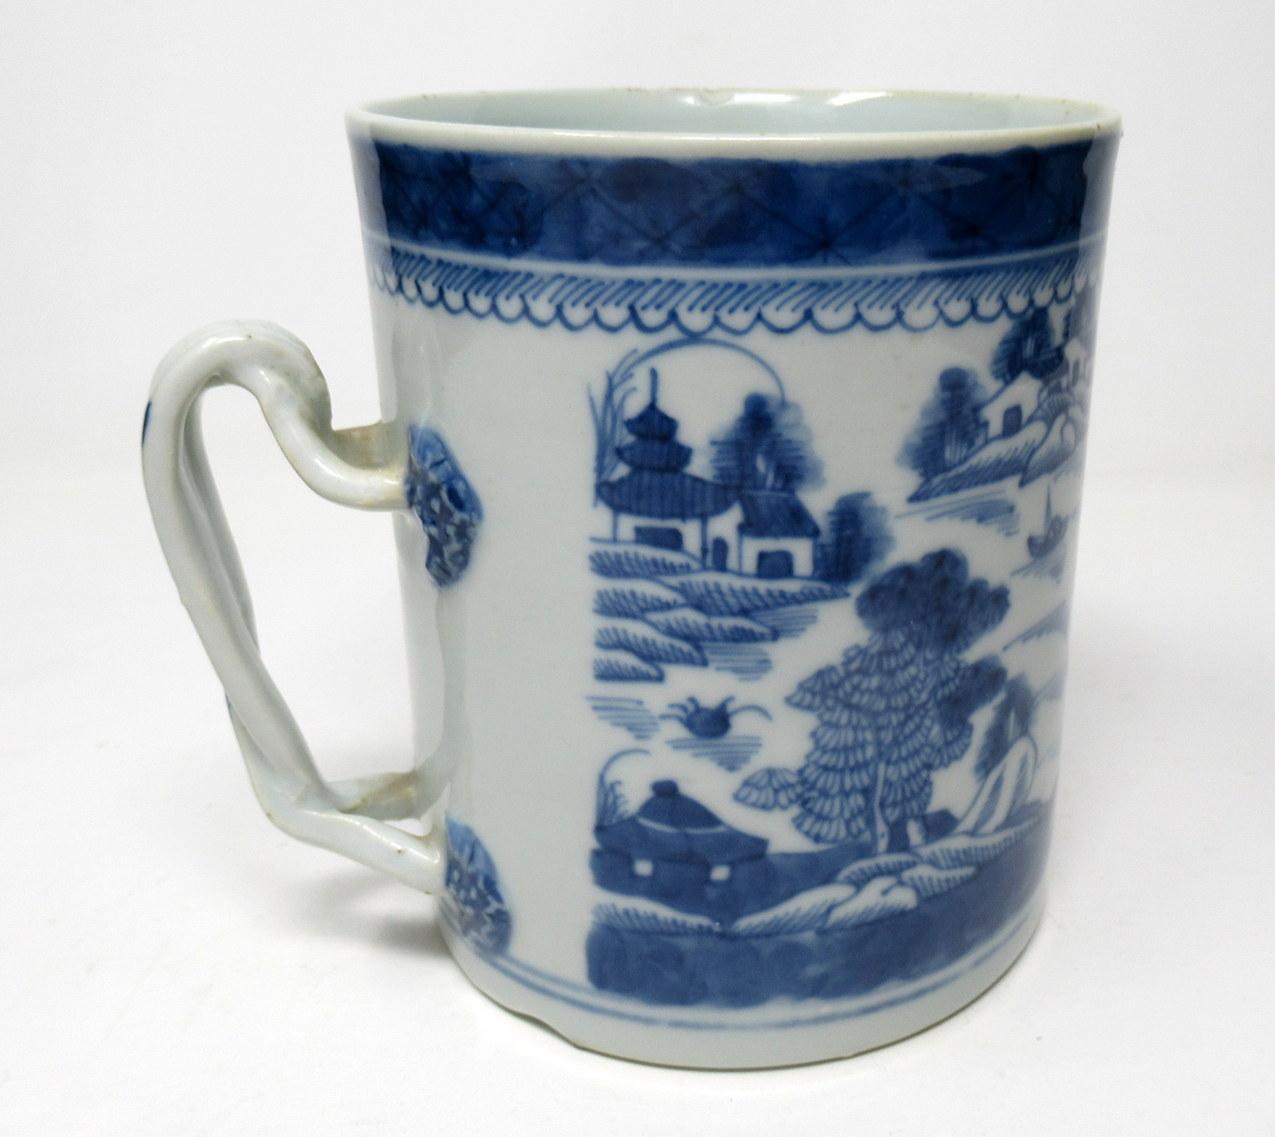 A very fine Chinese export hand decorated blue and white porcelain tankard of unusually large proportions, superbly decorated depicting a continuous view of a Chinese village with a river and landscape scene. Applied decorative moulded cross-over